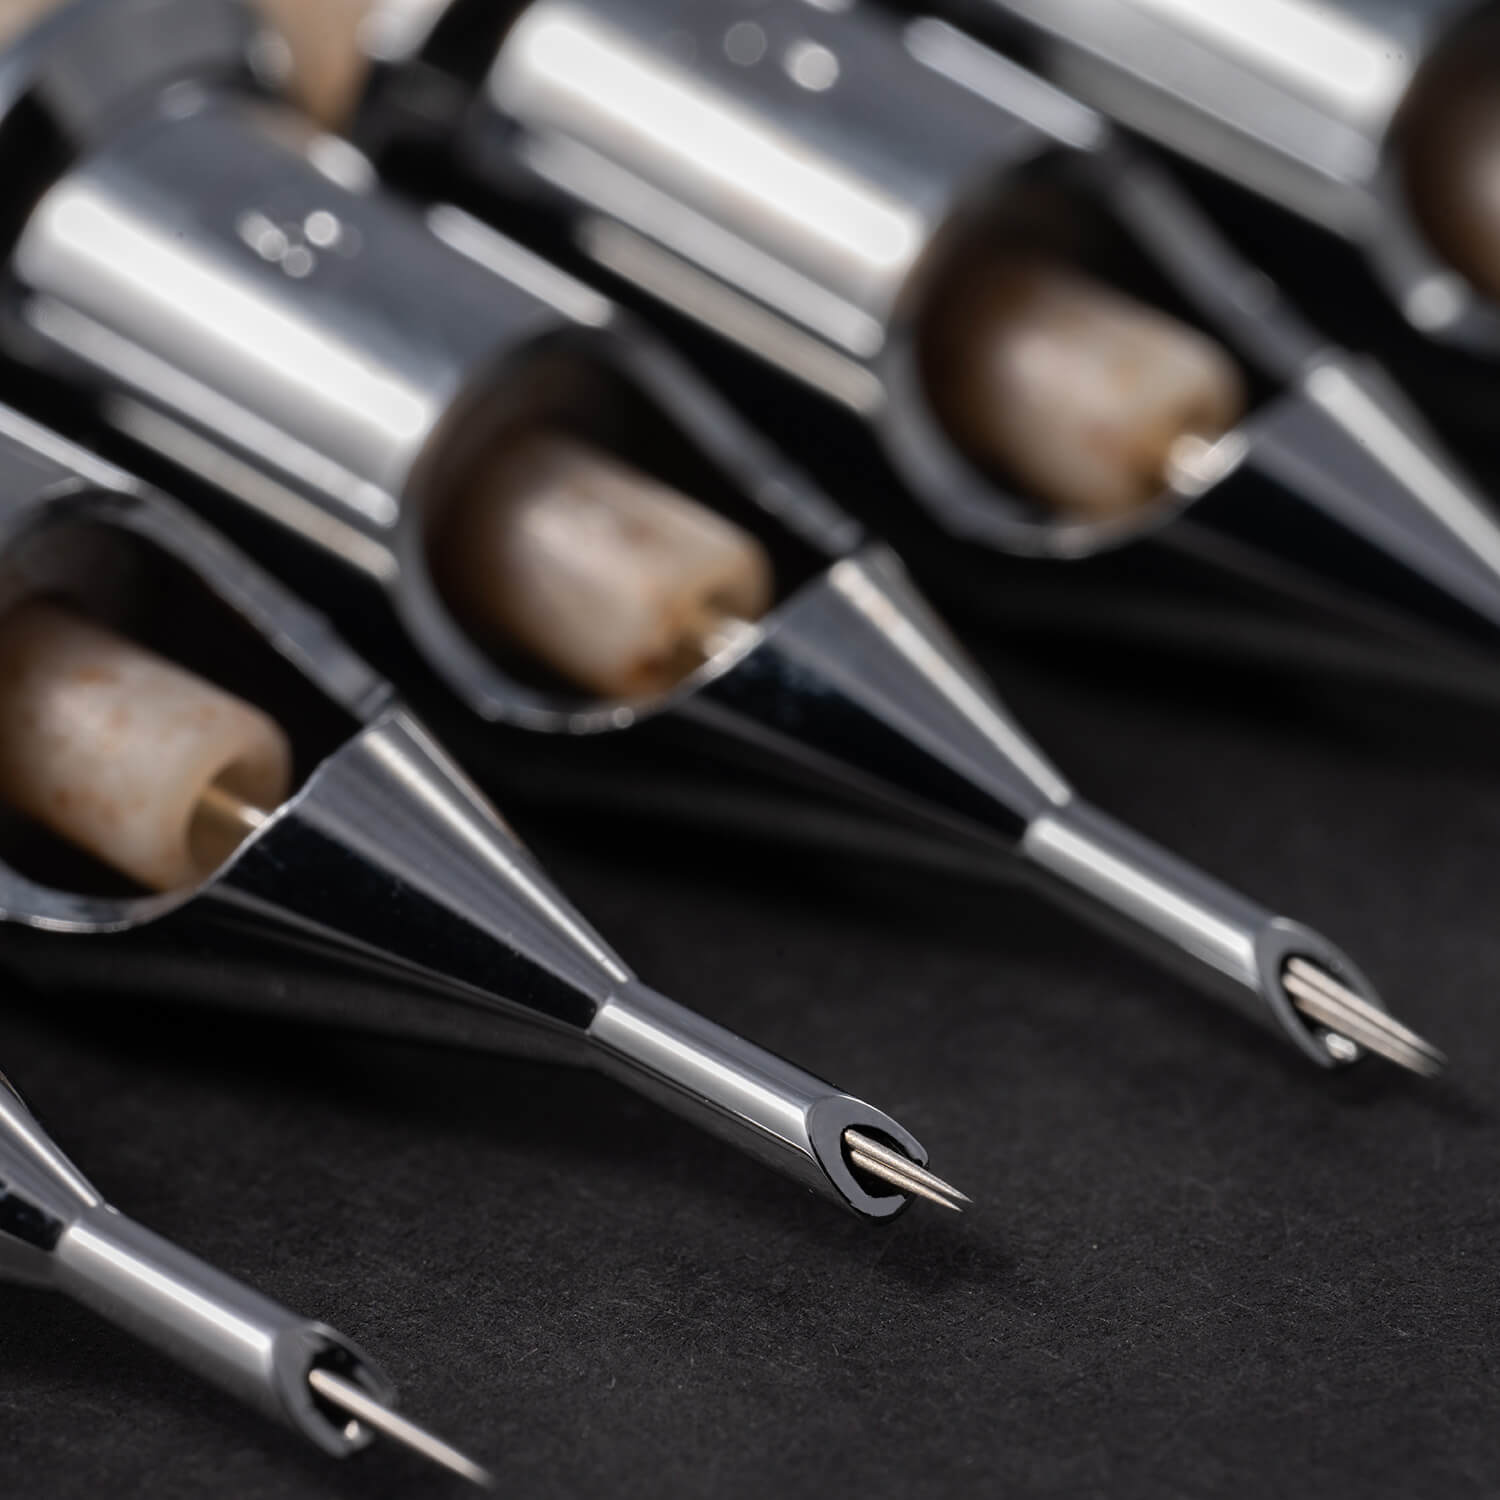 A close-up of different needle sizes of the TATSoul ENSO premium tattoo cartridges.